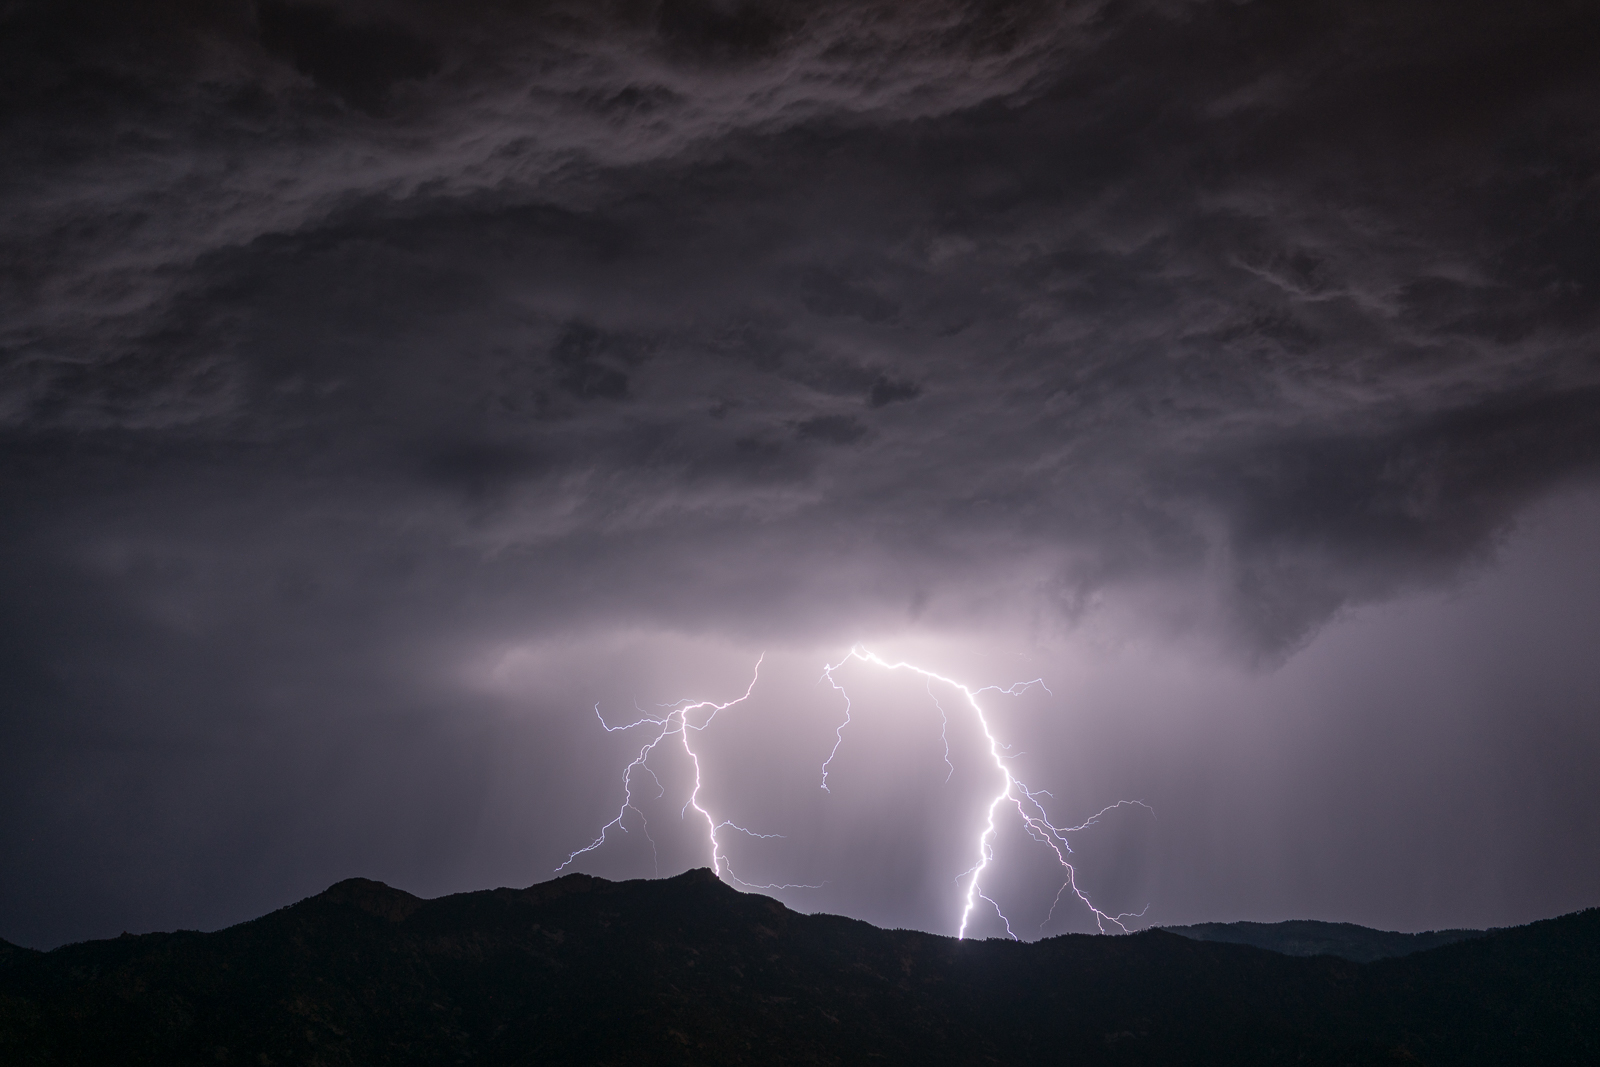 Lightning over Samaniego Ridge on the west side of the Santa Catalina Mountains - taken from the Golder Ranch area. July 2016.